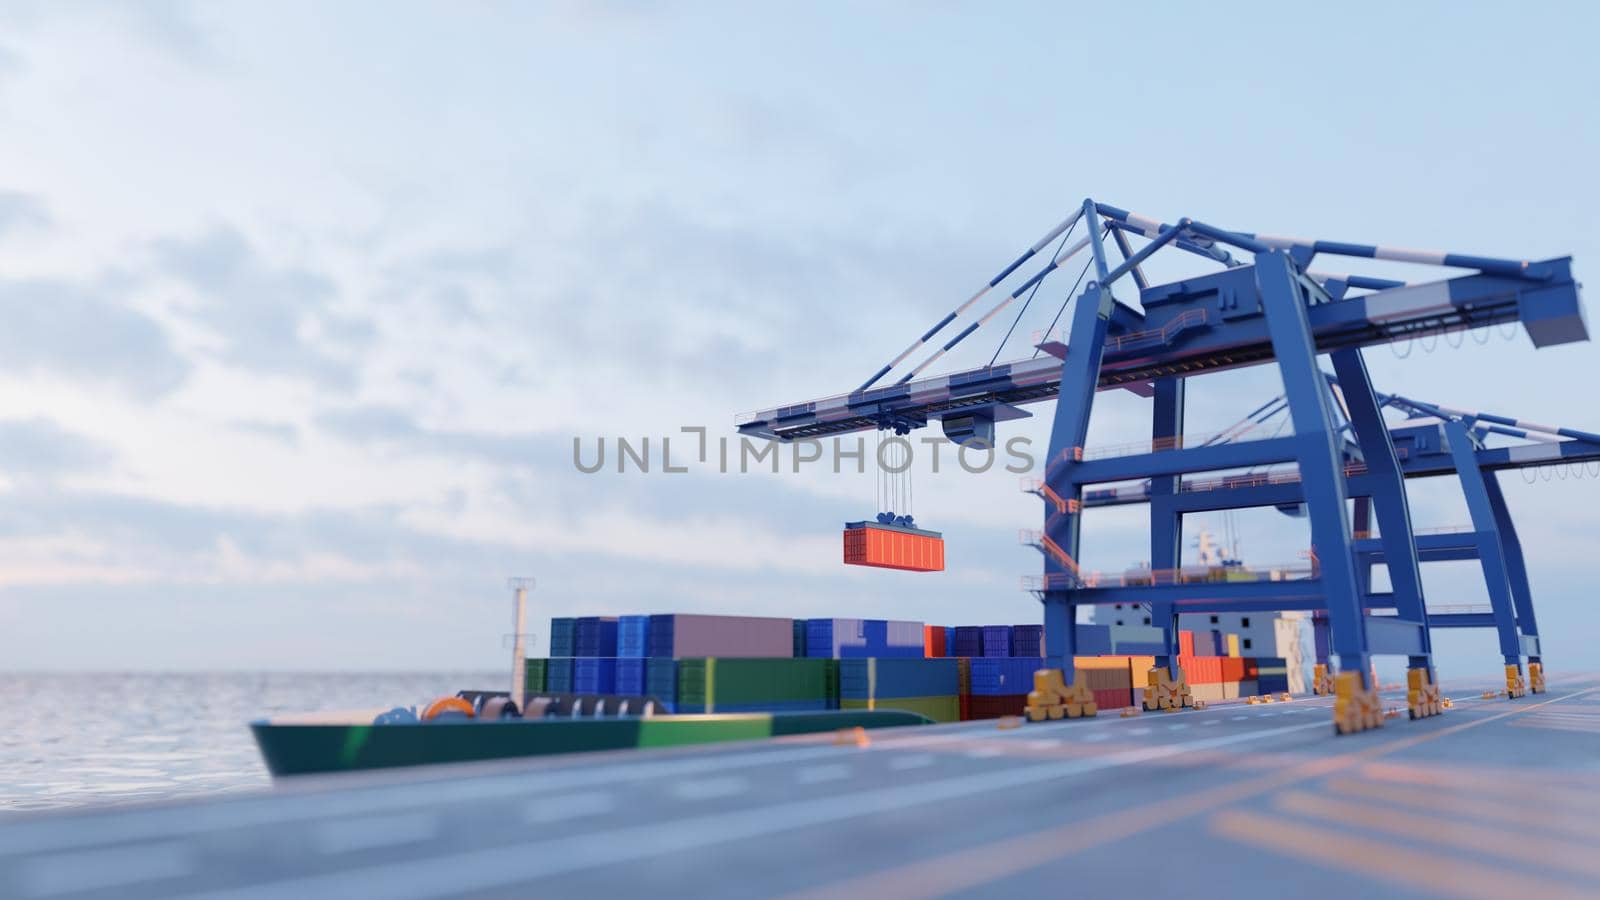 Port cranes loading containers on a cargo ship at the port. Tilt-shift effect. Digital 3D render, low poly.